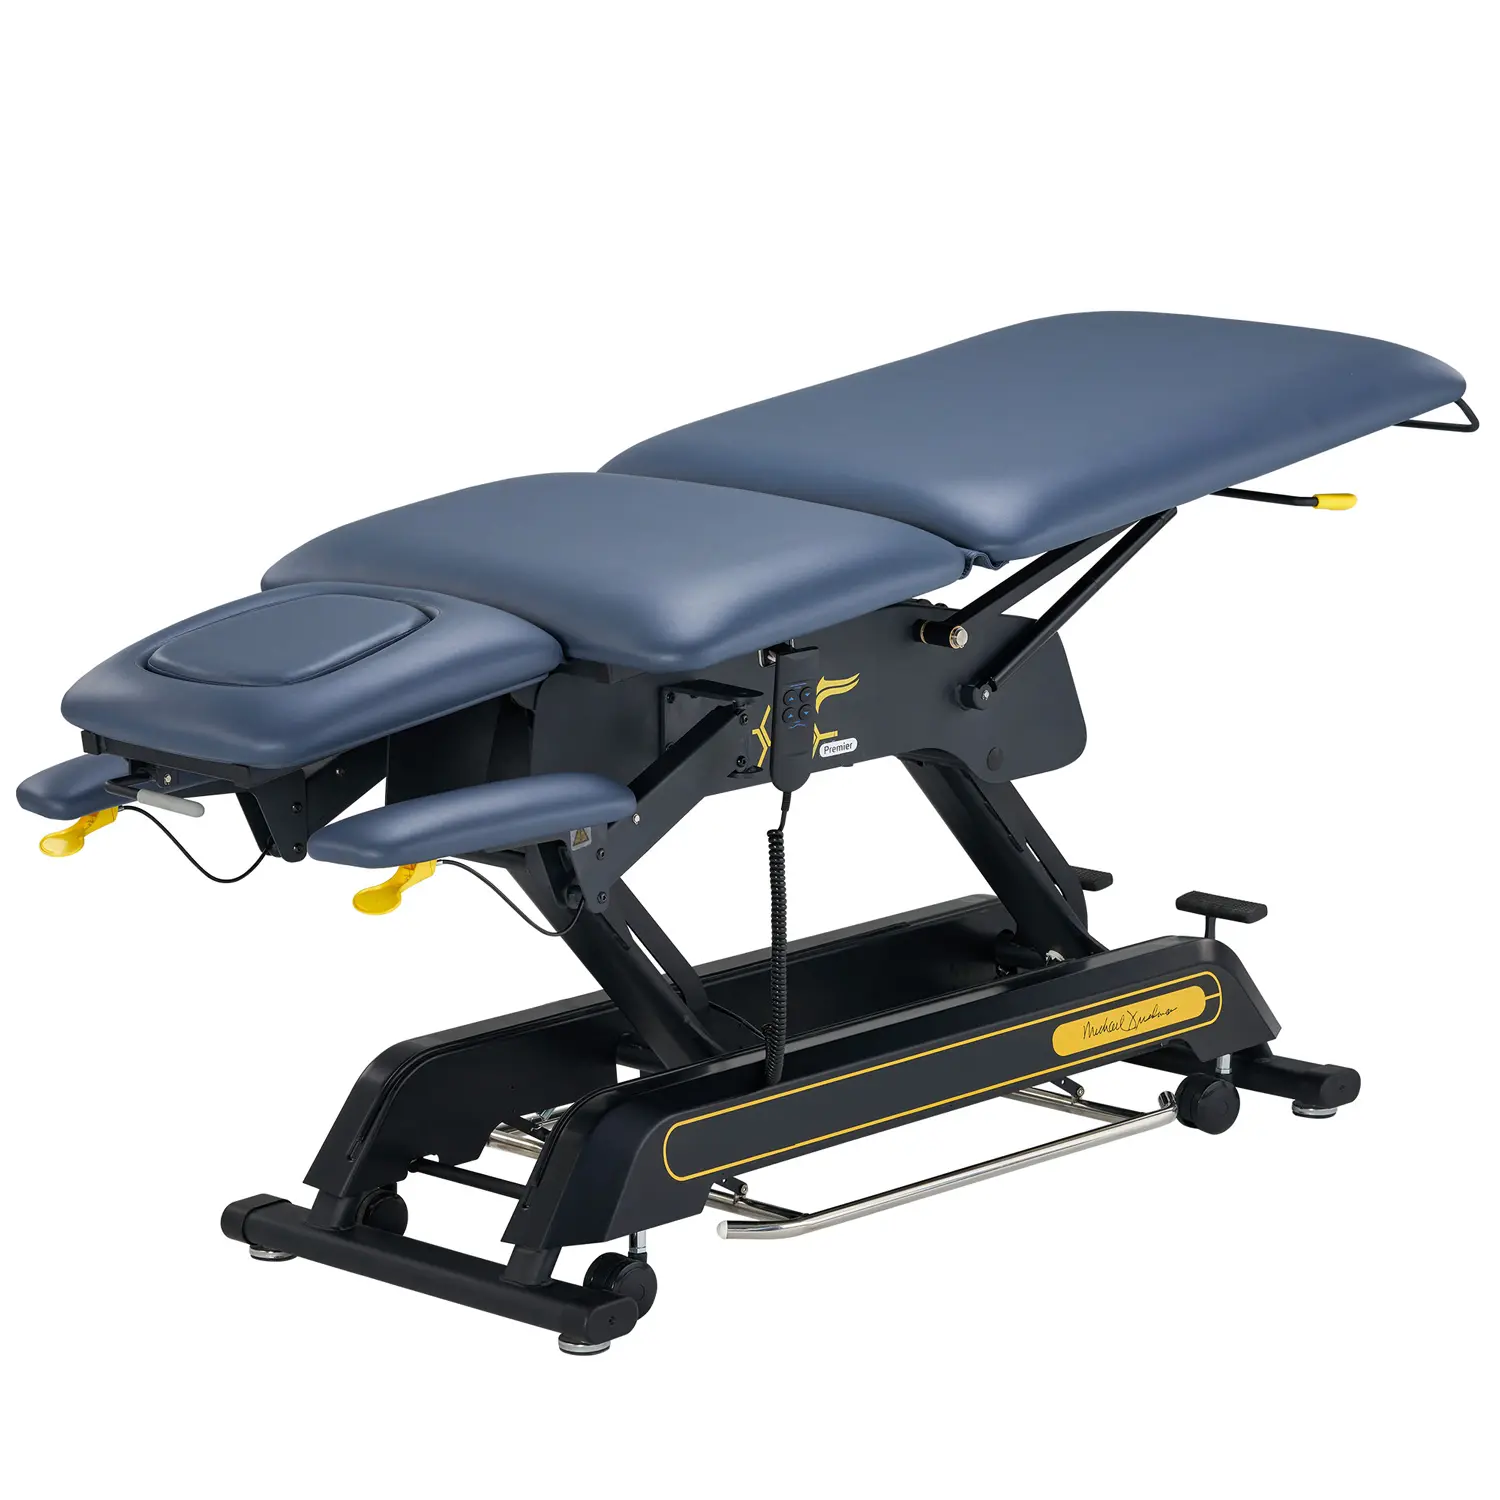 Hemet Premier-Infinity Factory Cheap Professional Electric Physiotherapy Treatment Table Treatment Examination Bed Massage Table